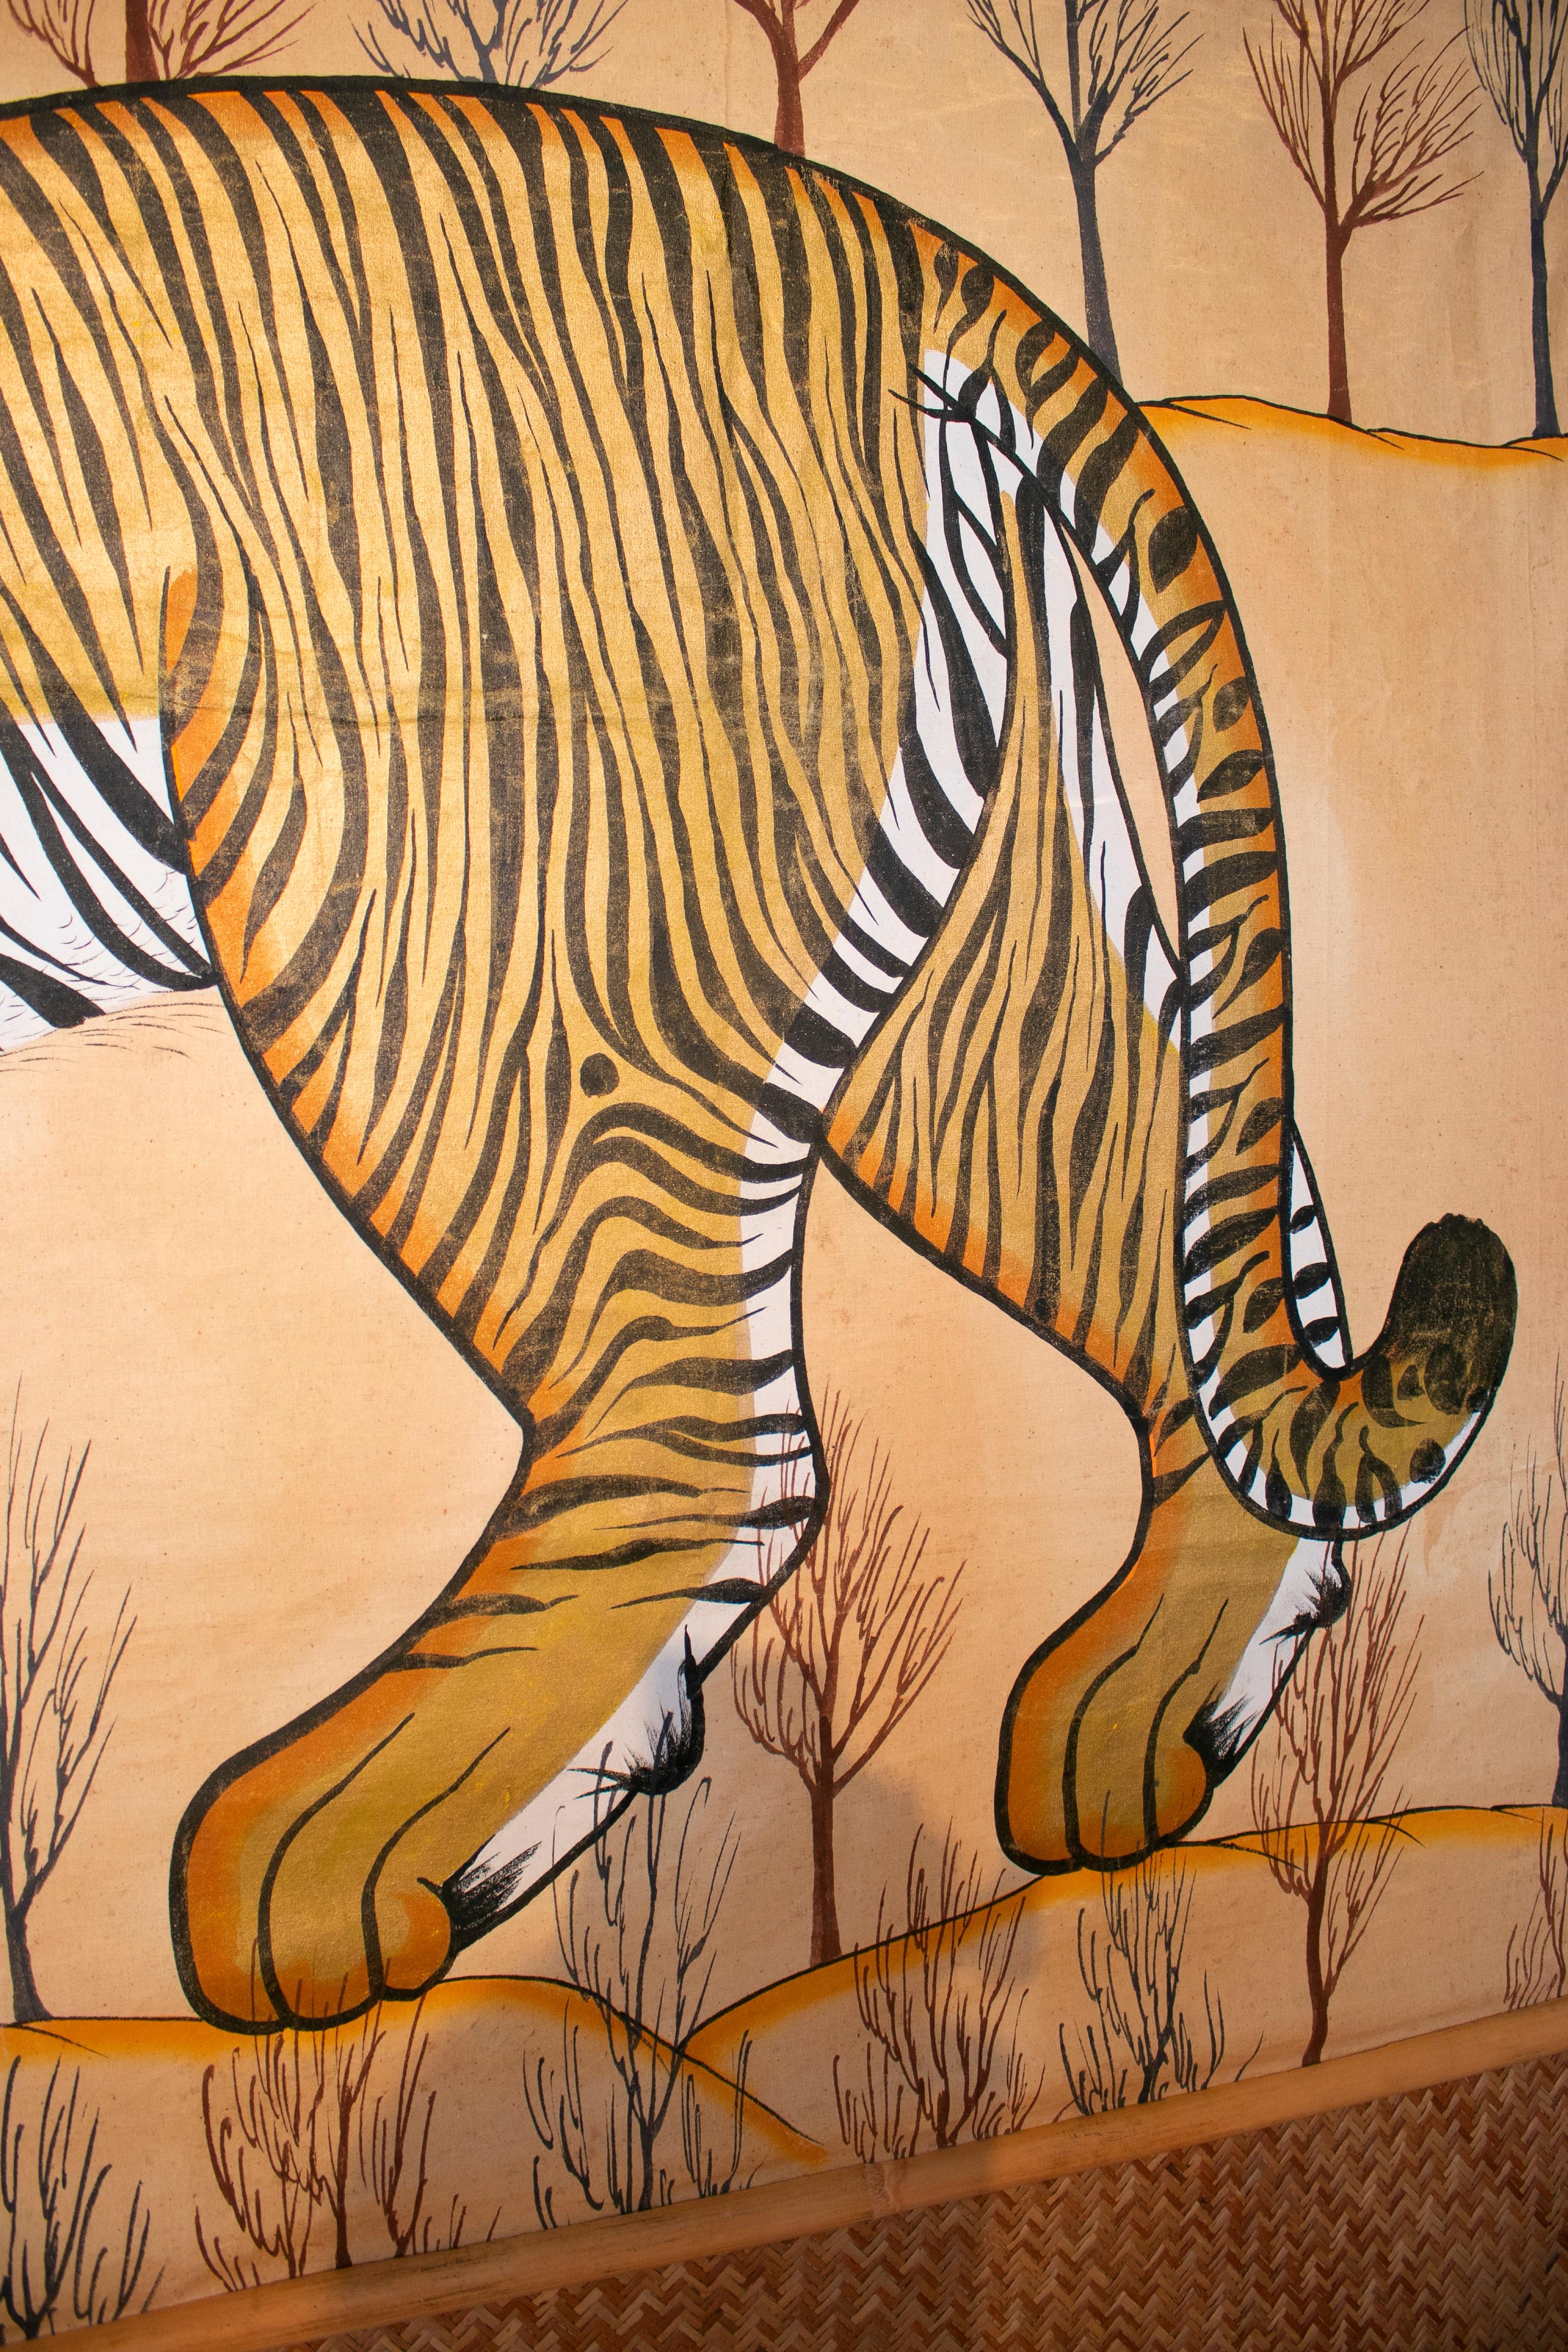 Jaime Parlade Designed Tiger Drawn on Fabric and Framed in Bamboo & Indian Straw 1